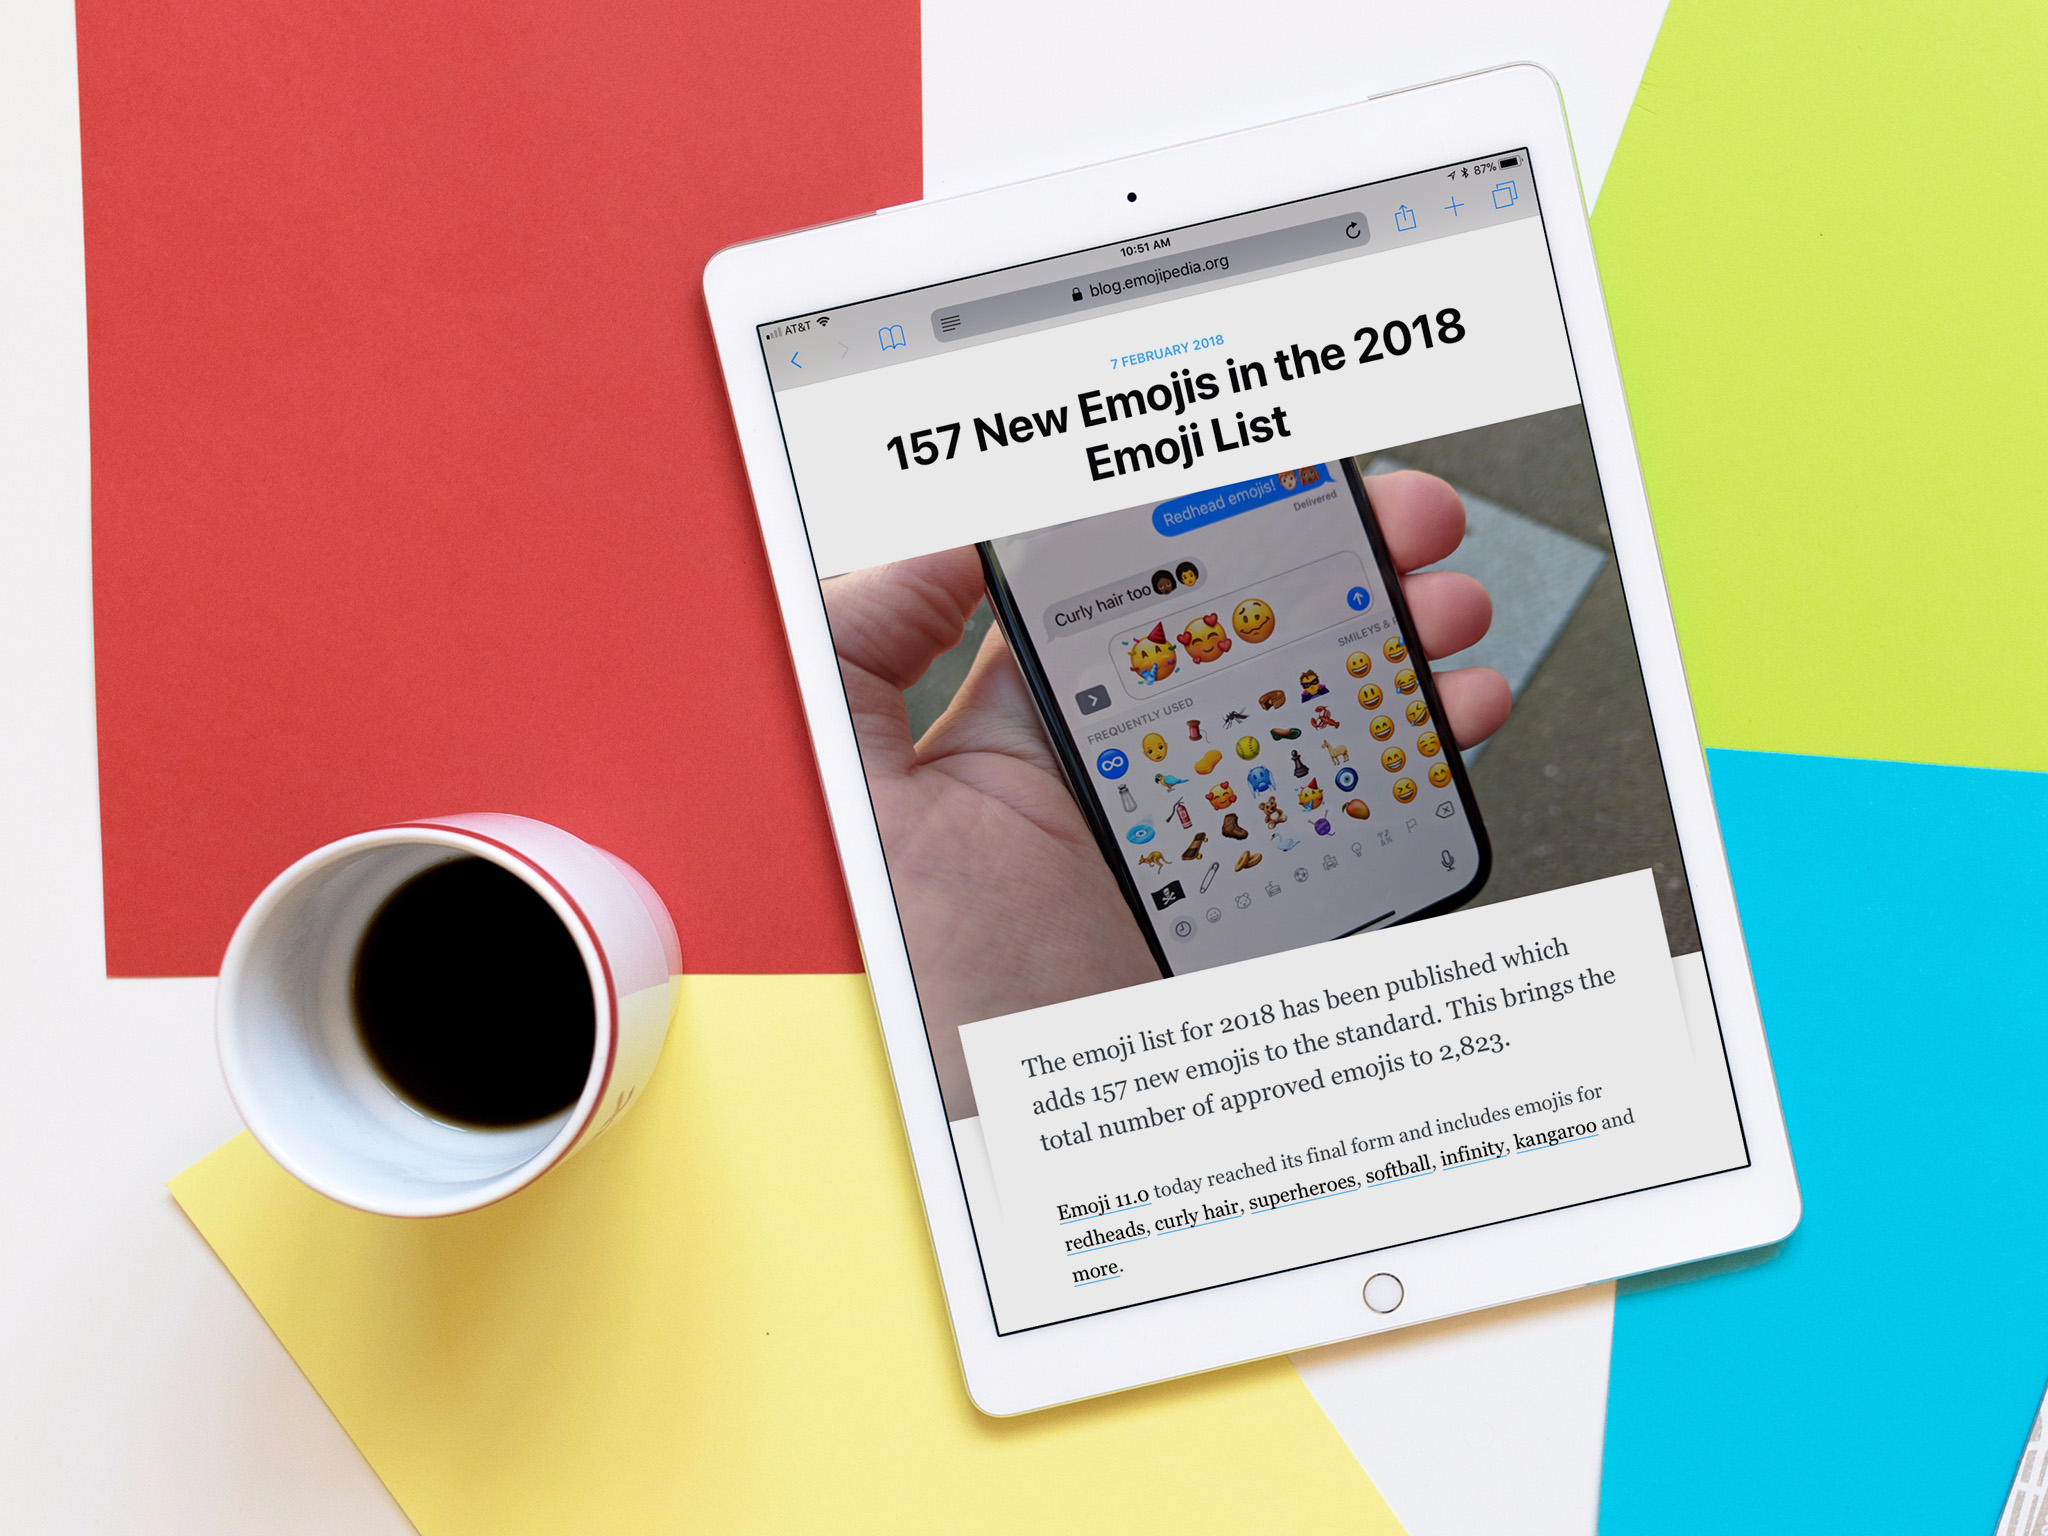 The emojipedia website is shown on an iPad Pro which rests next to a cup of coffee